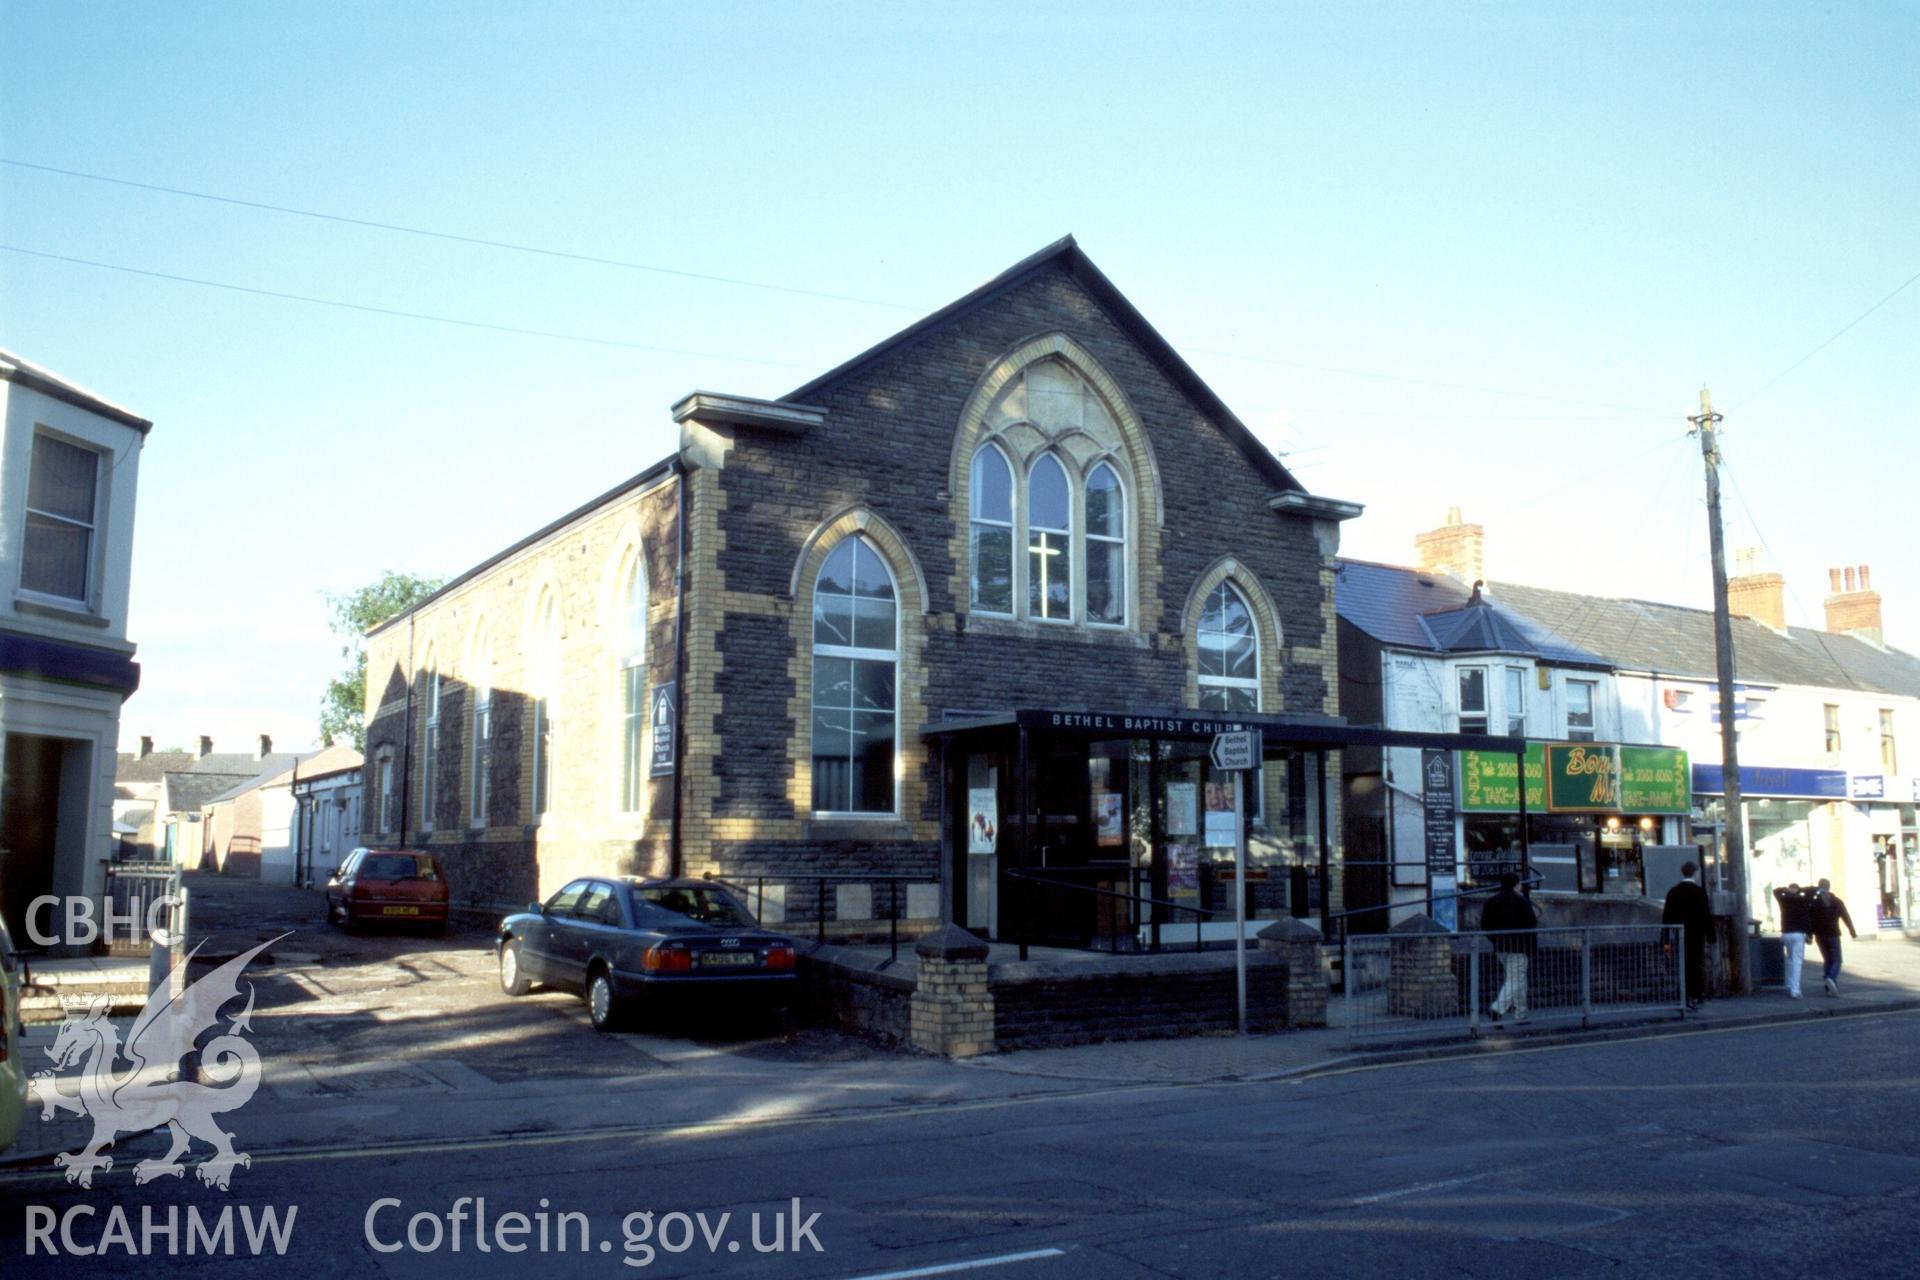 Photographic survey of Bethel Baptist Chapel, Penlline Road, Whitchurch; Eglwys Newydd, Yr, consisting of 1 colour transparencies, produced by Olwen Jenkins, 10/05/2003.